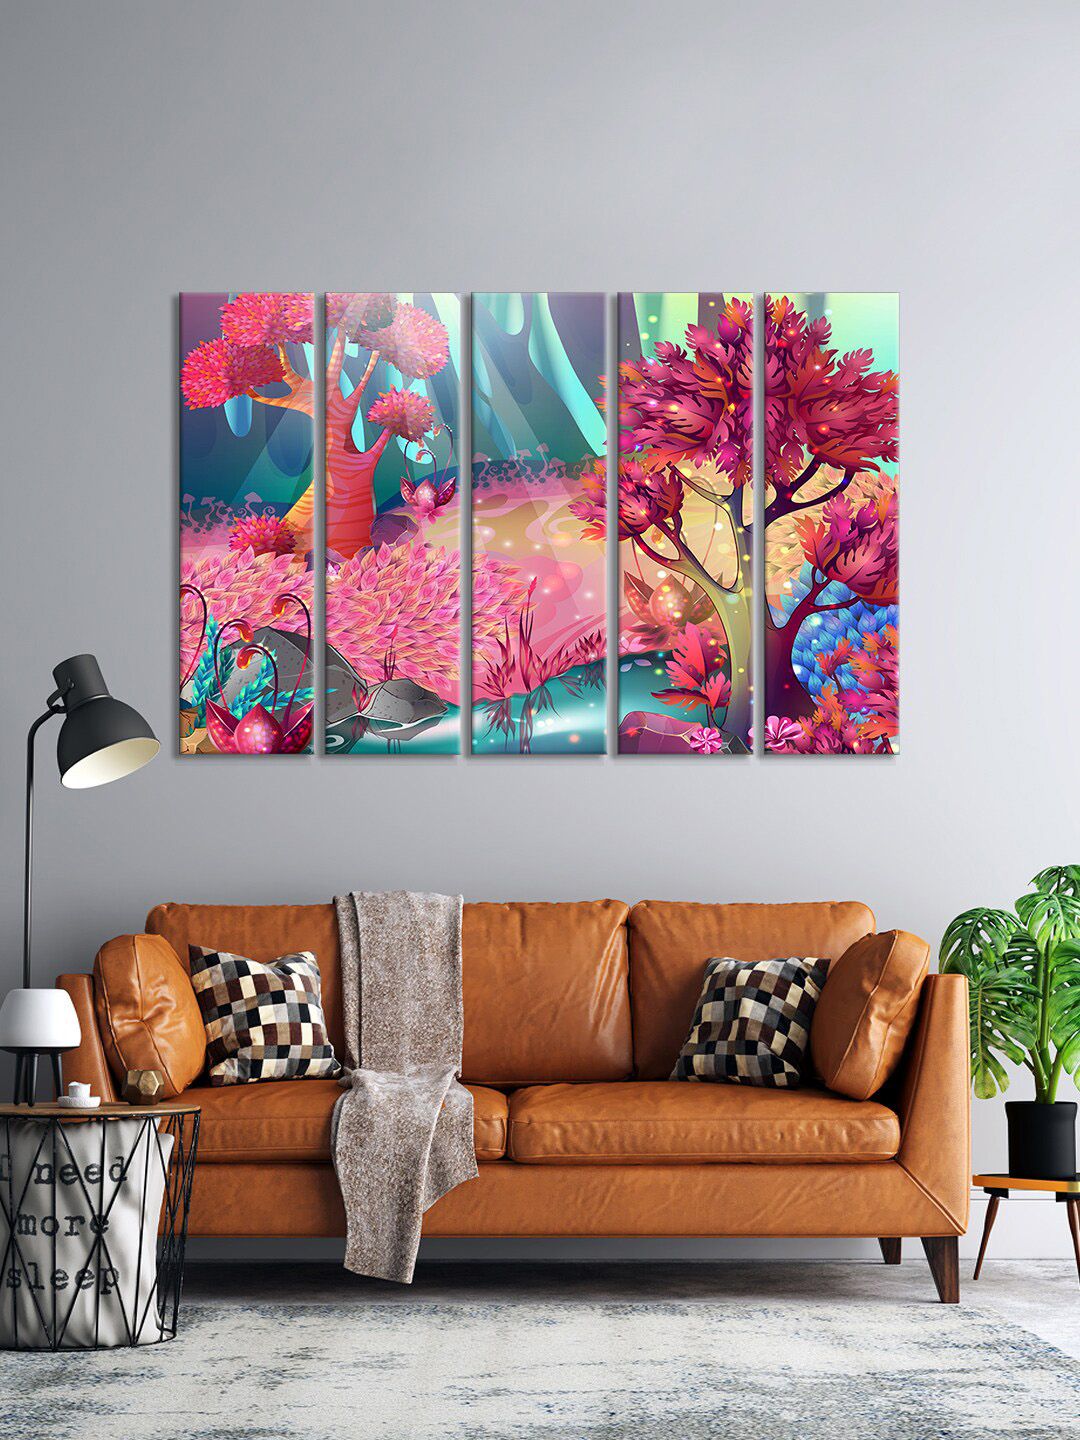 999Store Set Of 5 Pink & Blue Nature View Printed Wall Paintings Price in India